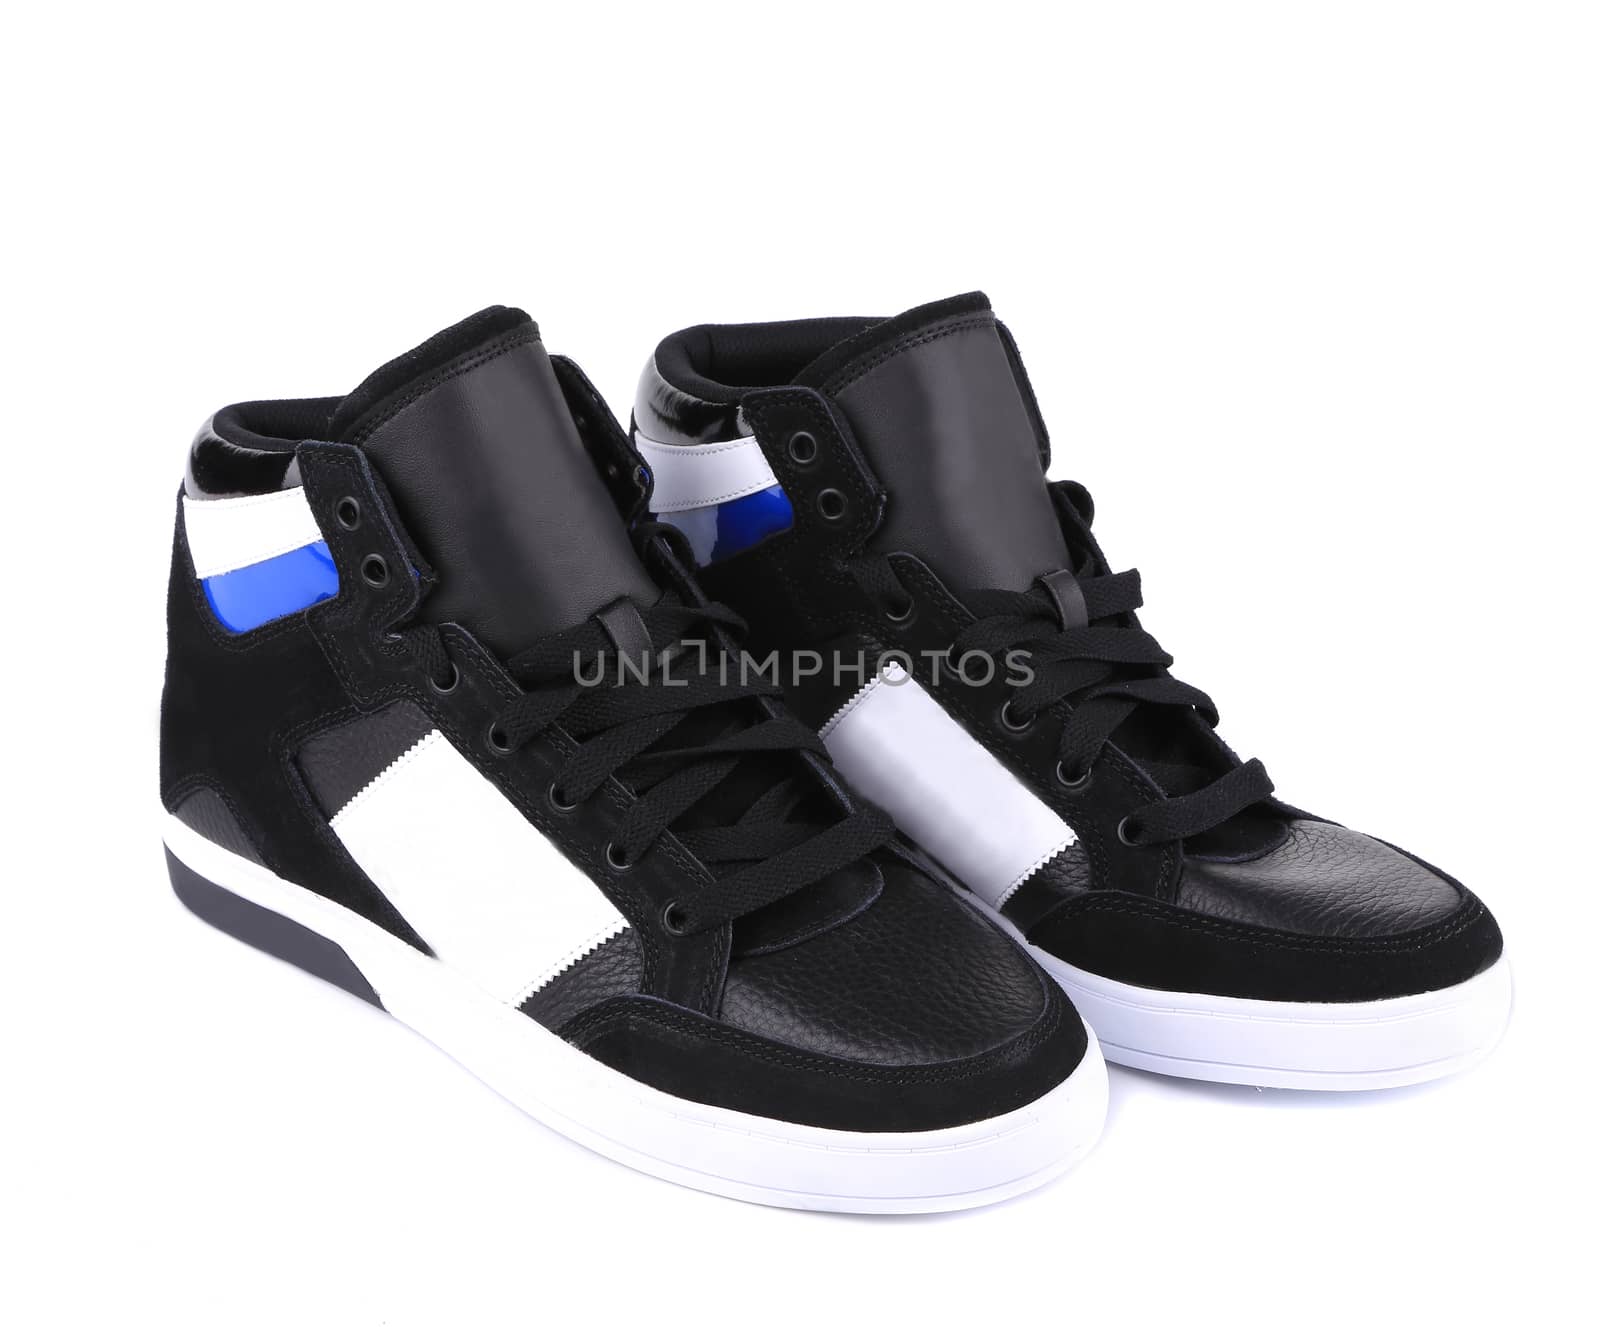 Youth sneakers. Isolated on a white background.